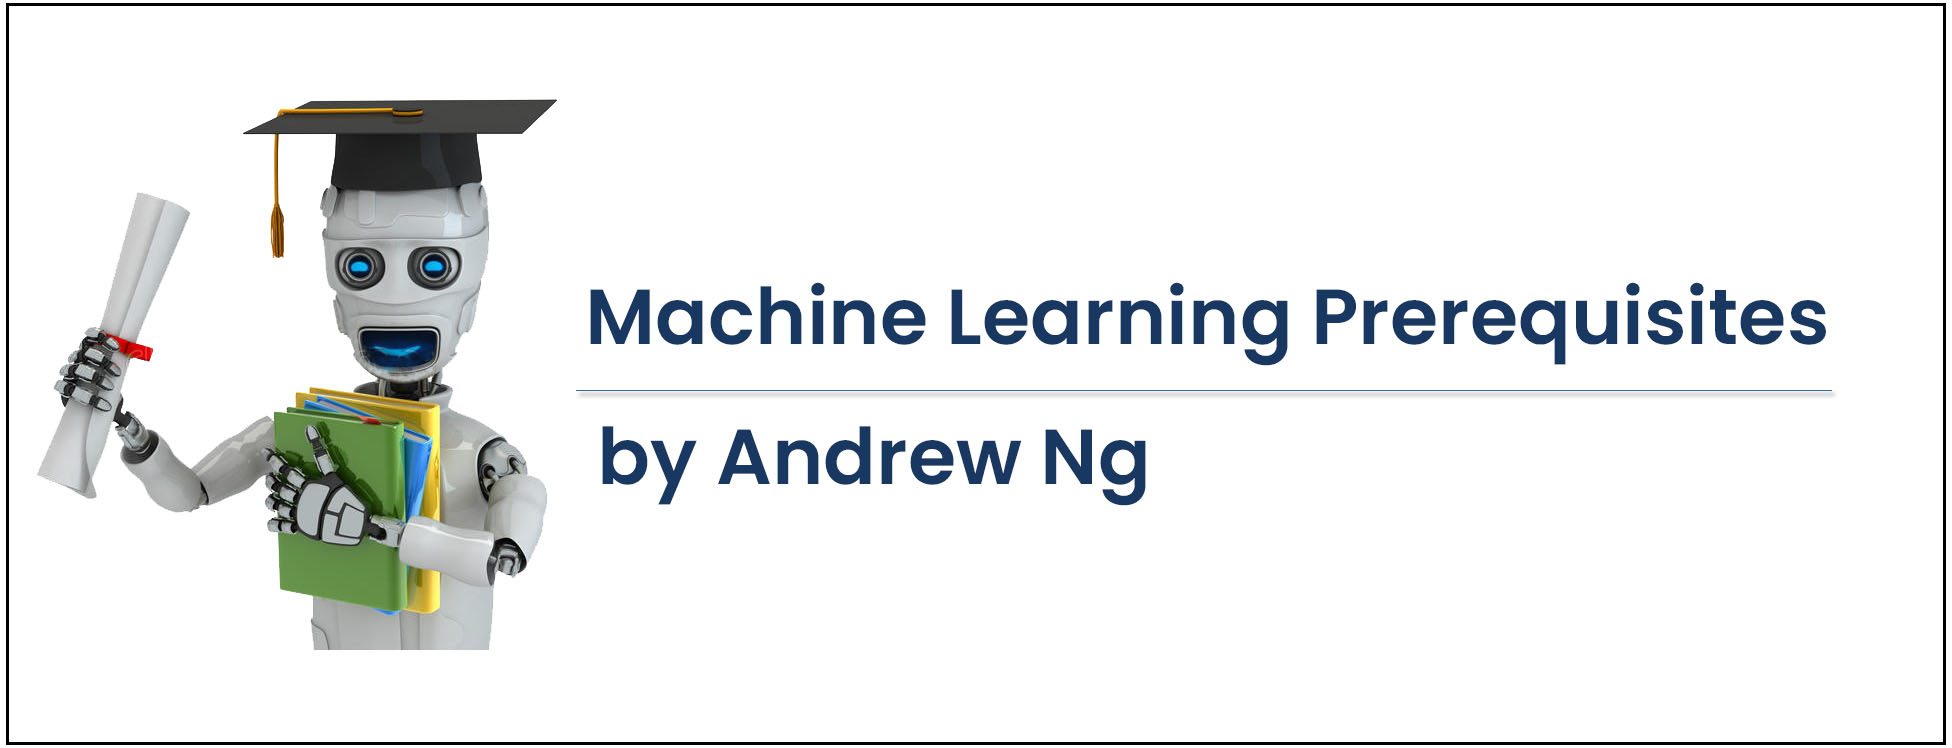 Andrew ng machine learning prerequisites